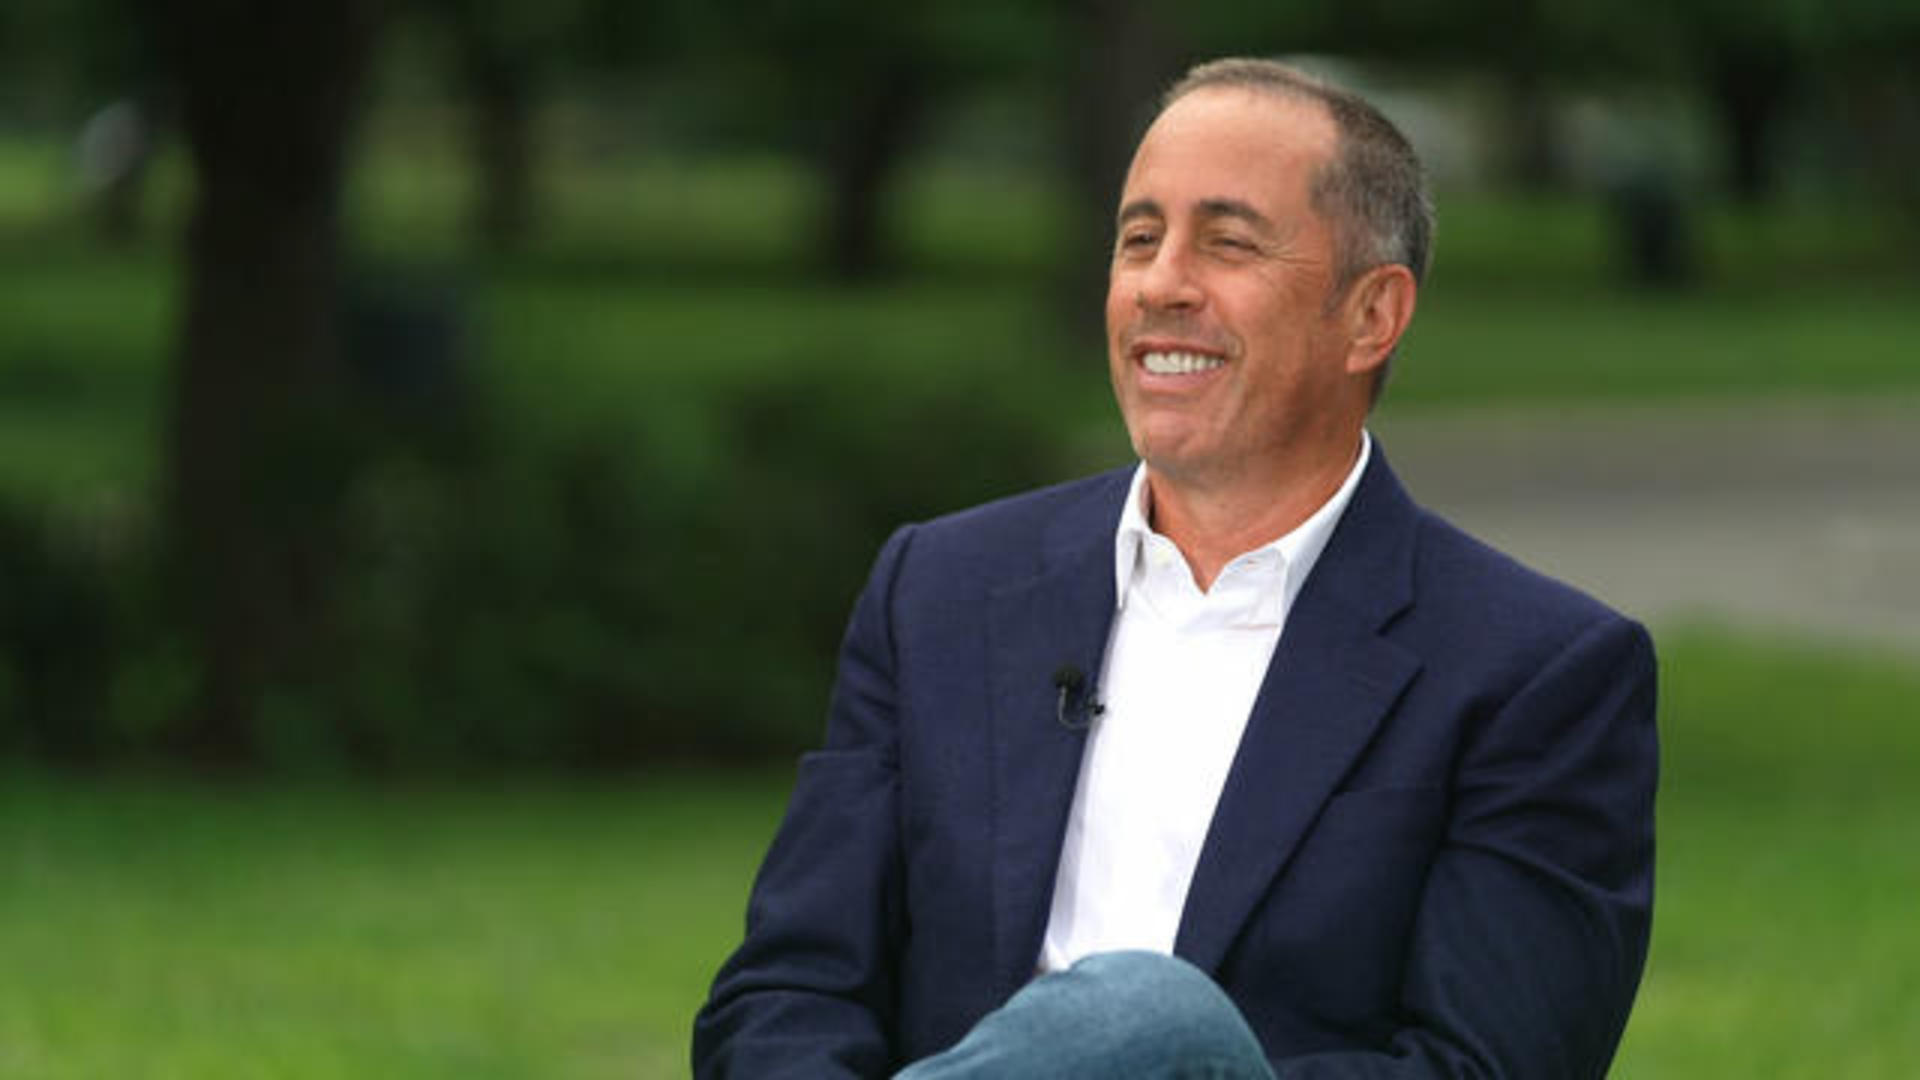 Jerry Seinfeld birthday tribute: 10 best sports moments from the show